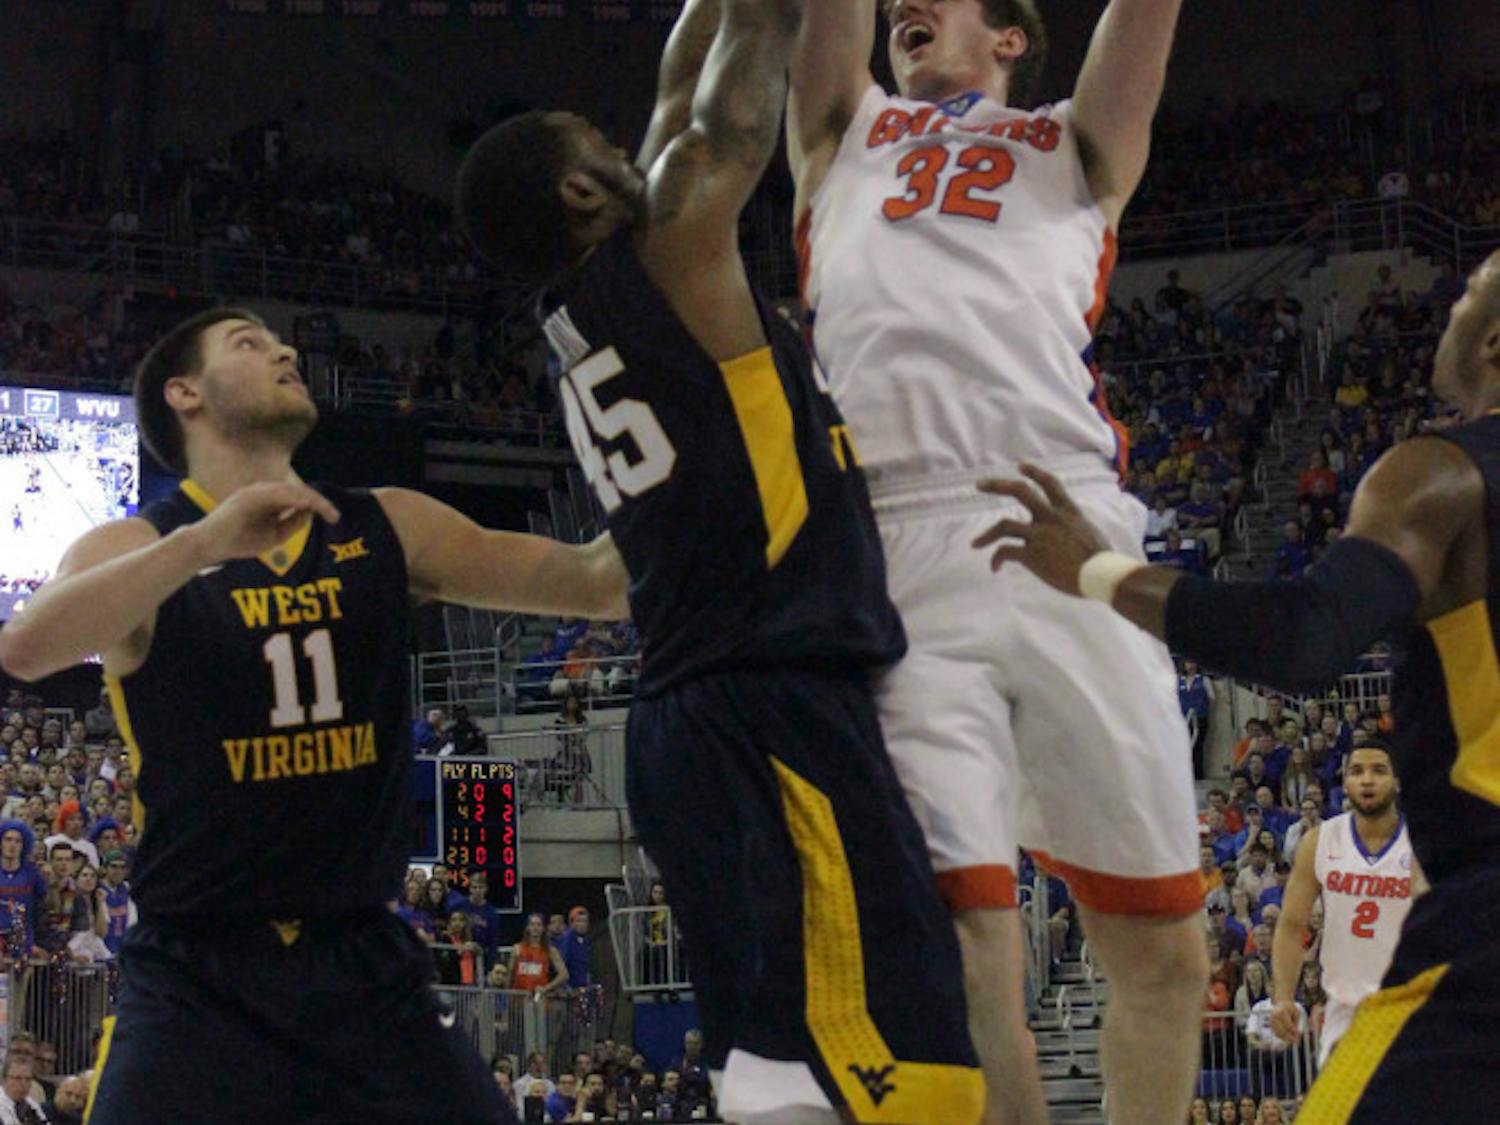 Schuyler Rimmer goes for a layup during Florida’s win over West Virginia on Jan. 30, 2016, in the O’Connell Center.